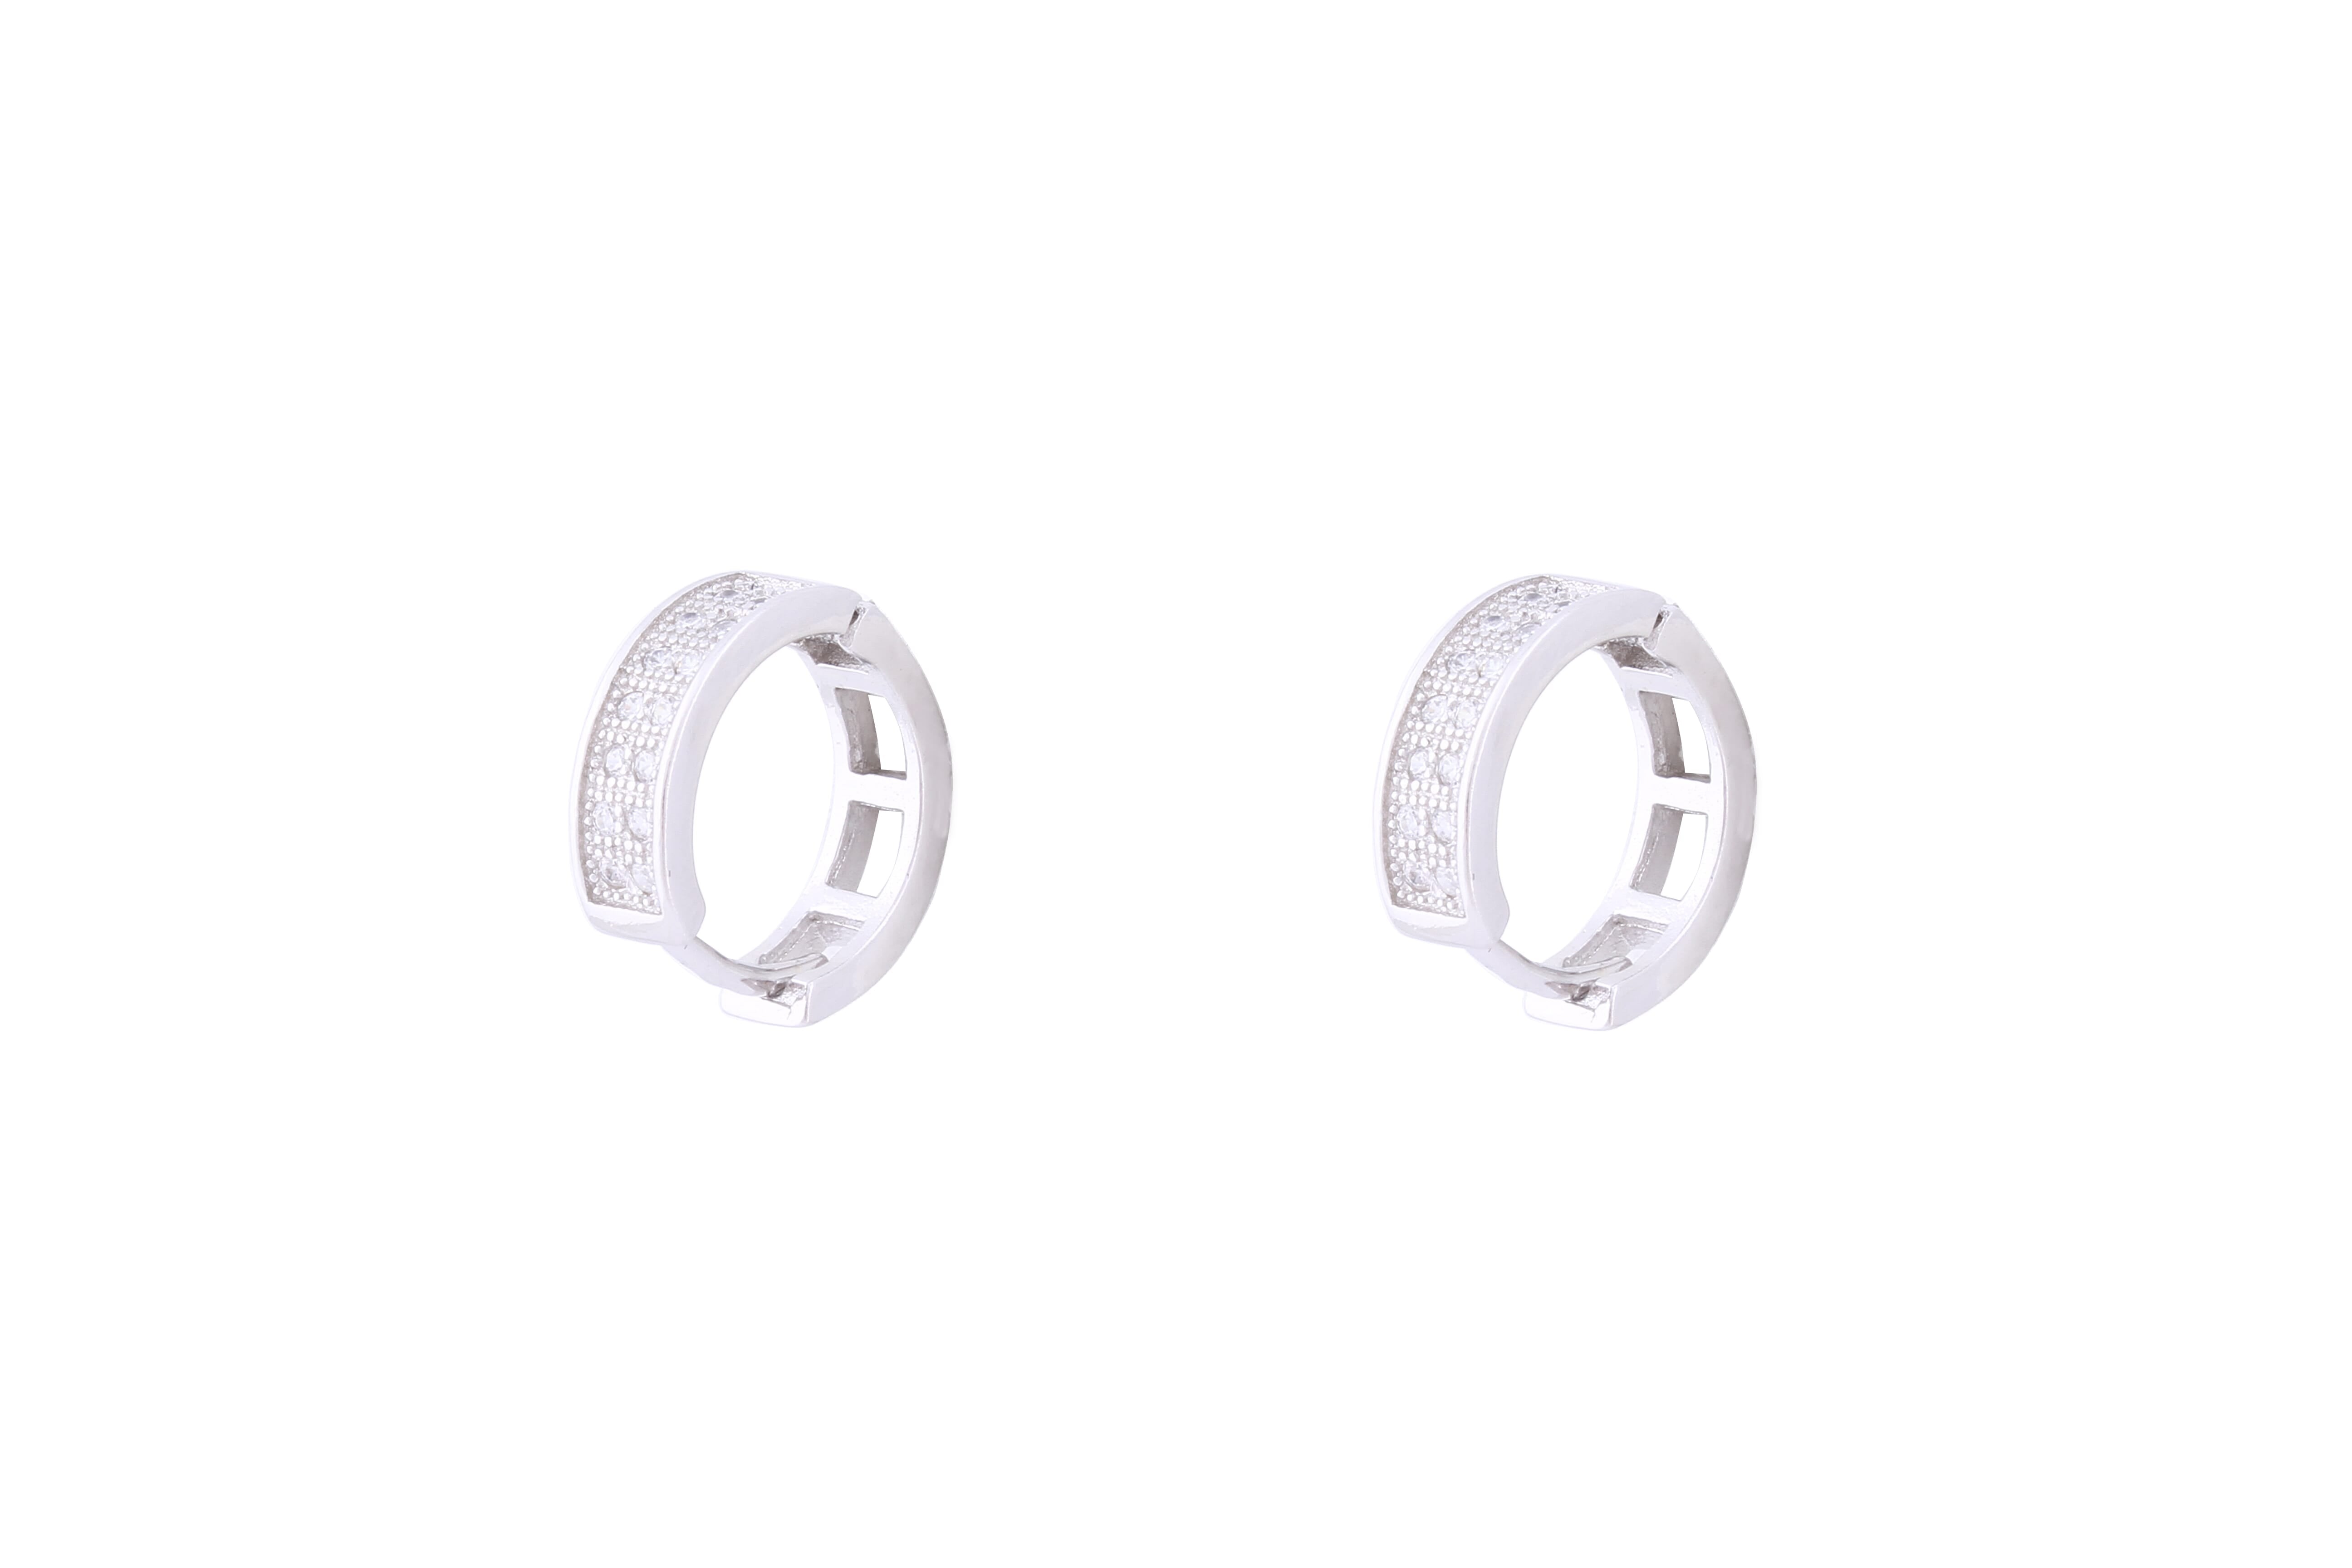 Asfour Crystal Hoop Earrings inlaid  With Round Zircon Stones In 925 Sterling Siver ER0415